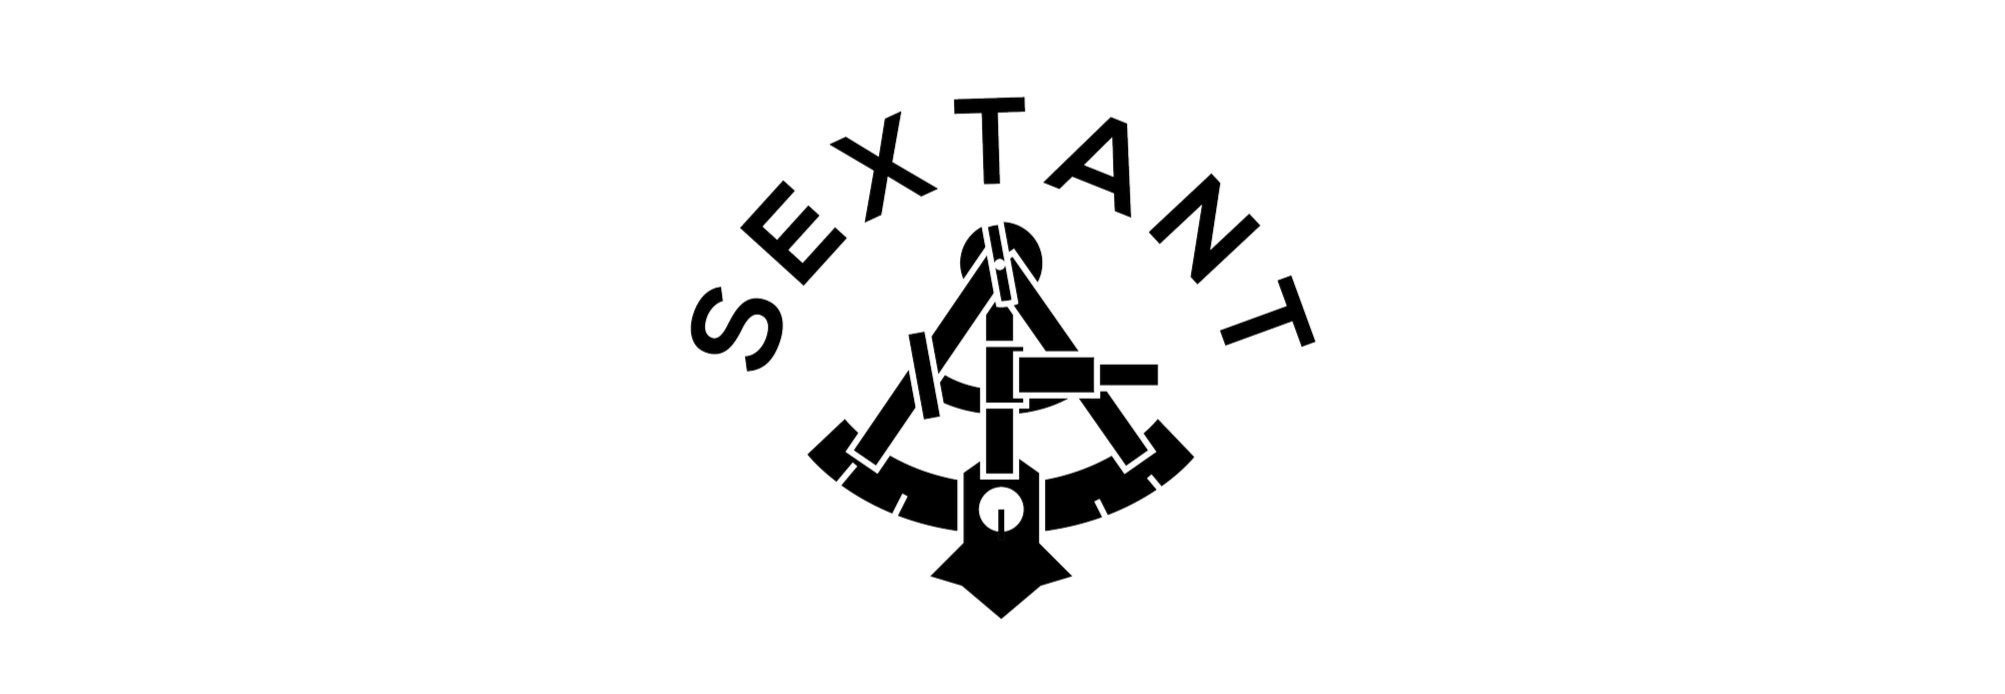 The Sextant